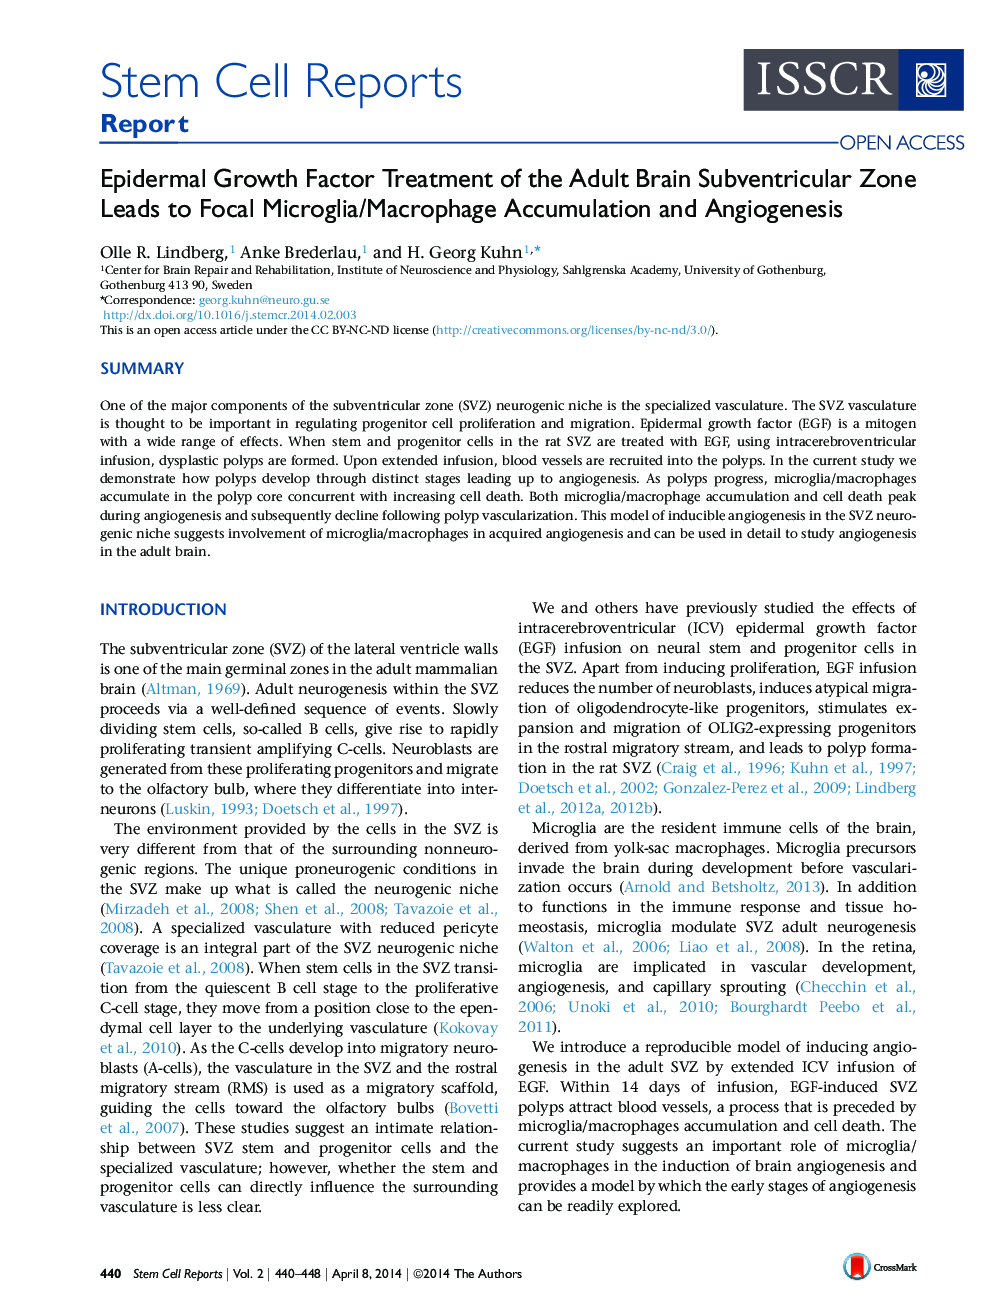 Epidermal Growth Factor Treatment of the Adult Brain Subventricular Zone Leads to Focal Microglia/Macrophage Accumulation and Angiogenesis 